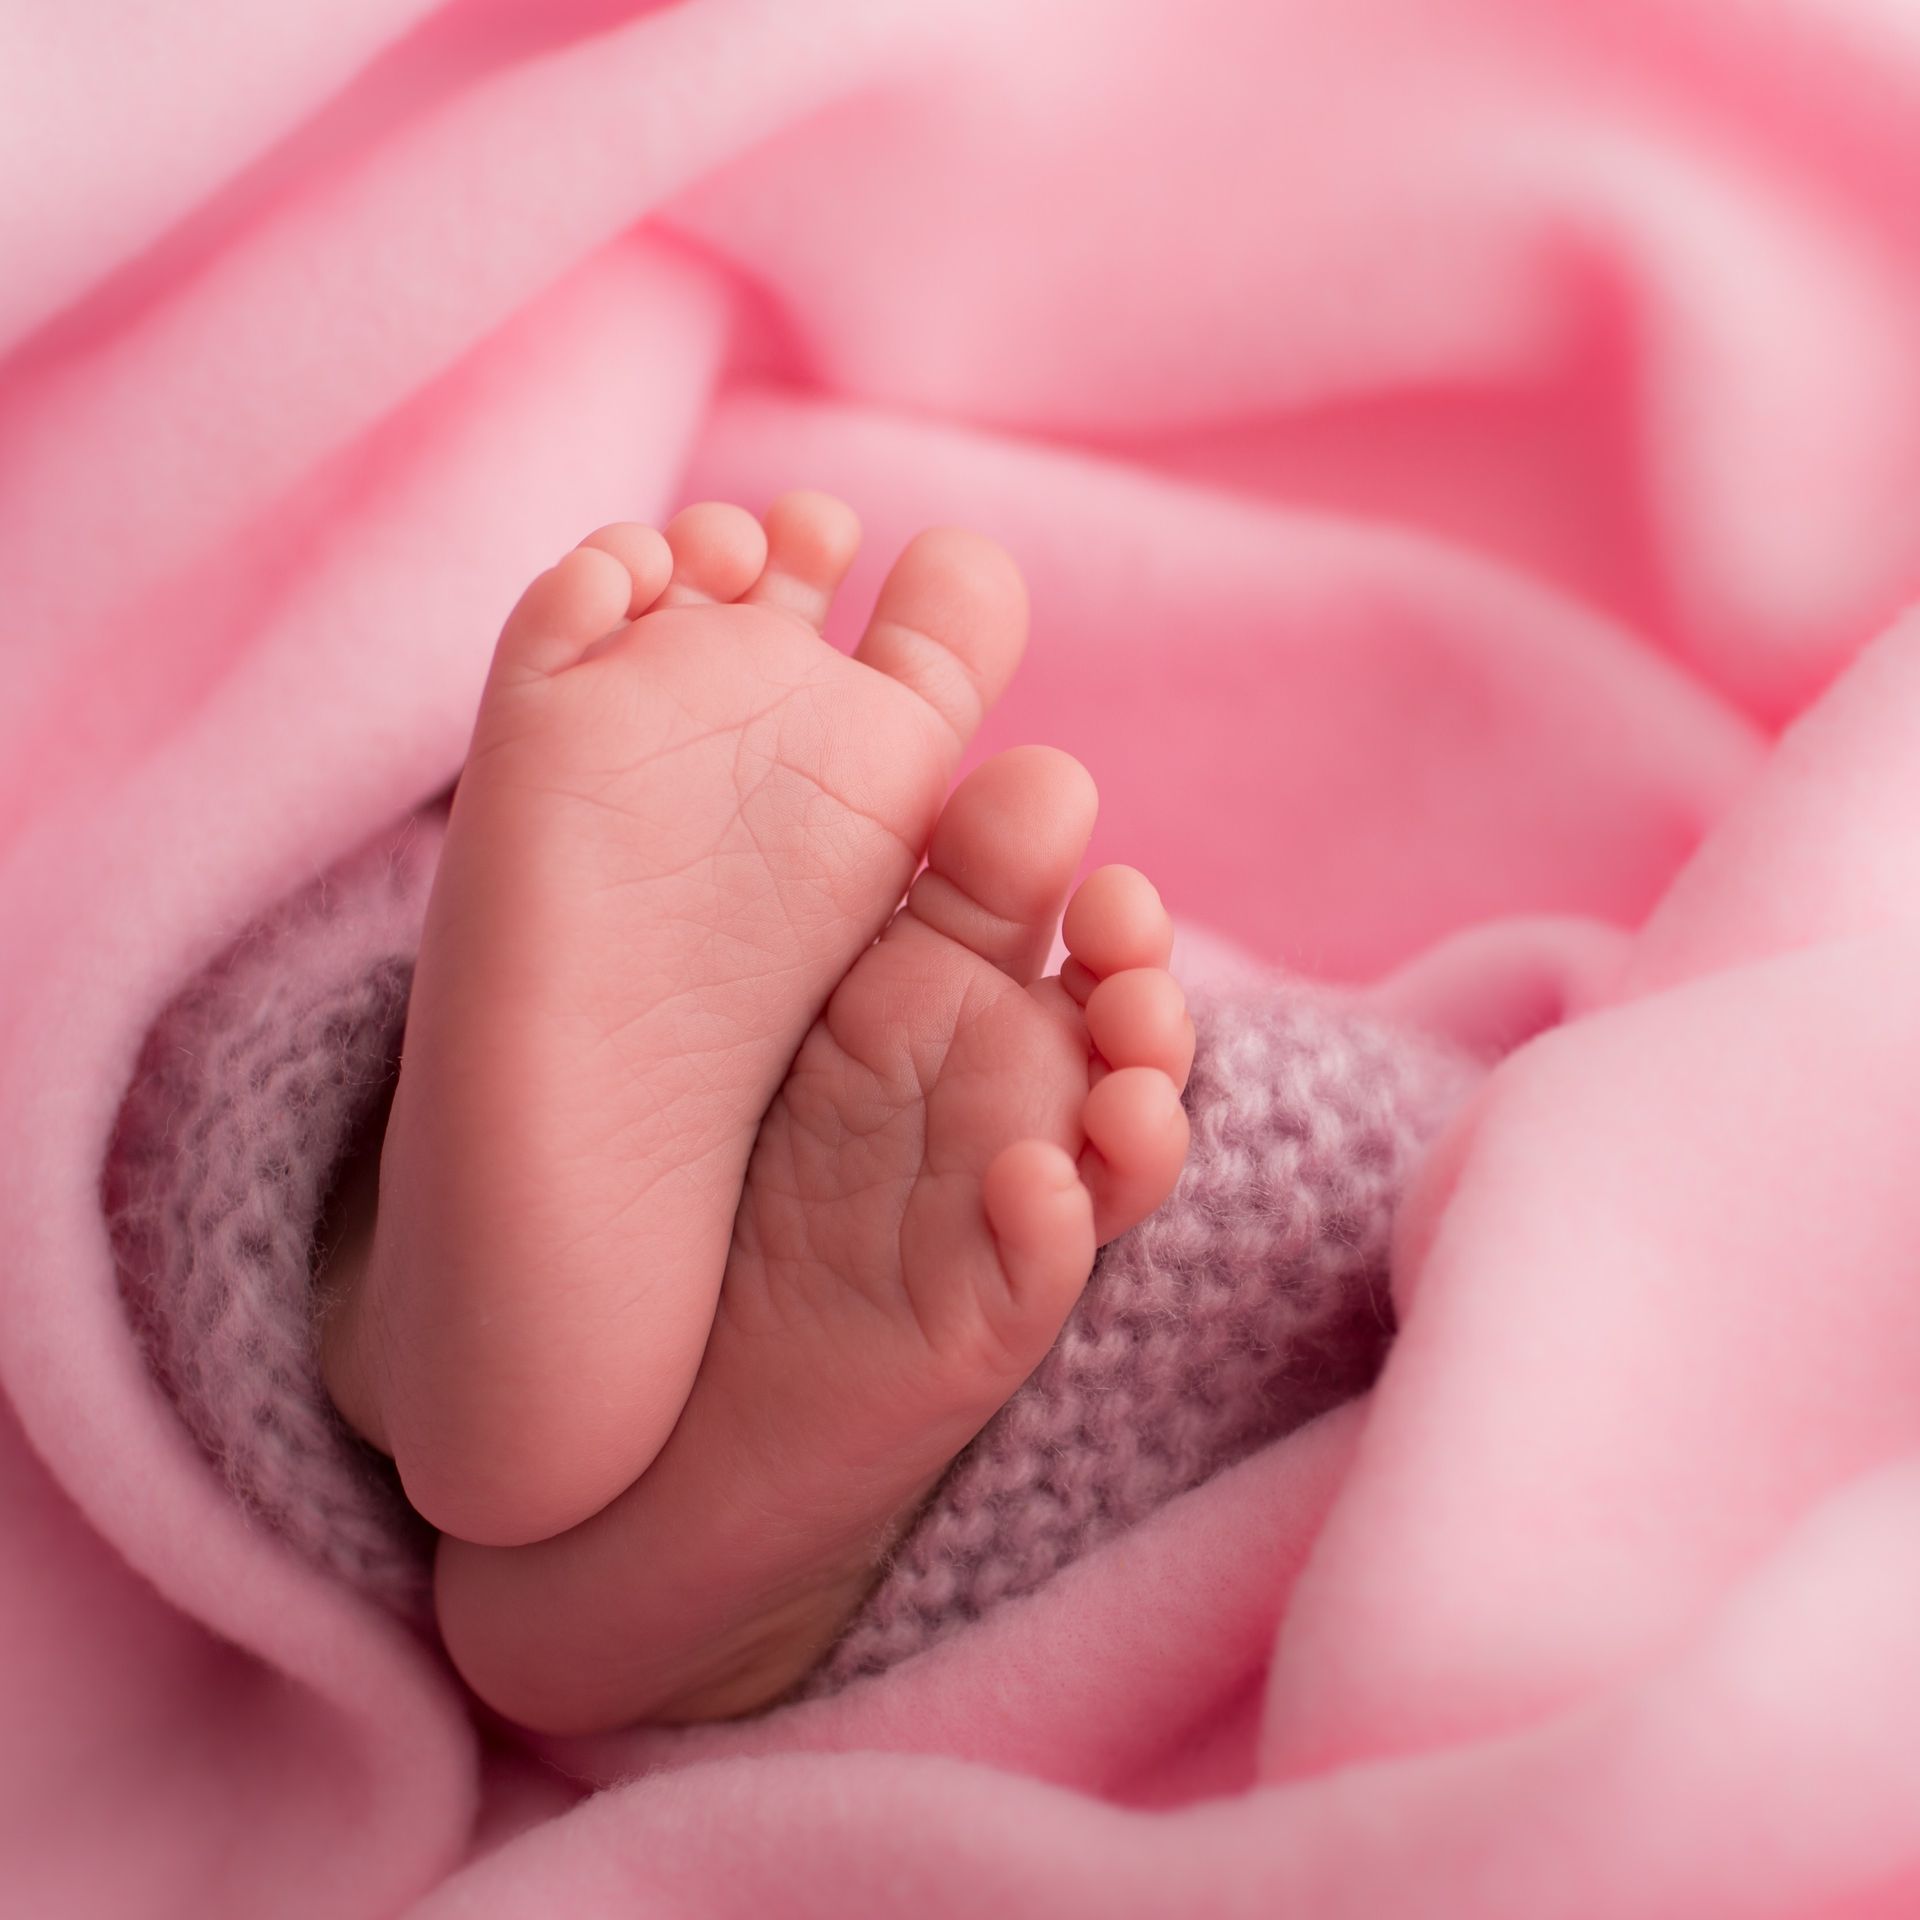 A baby’s feet wrapped in a blanket.